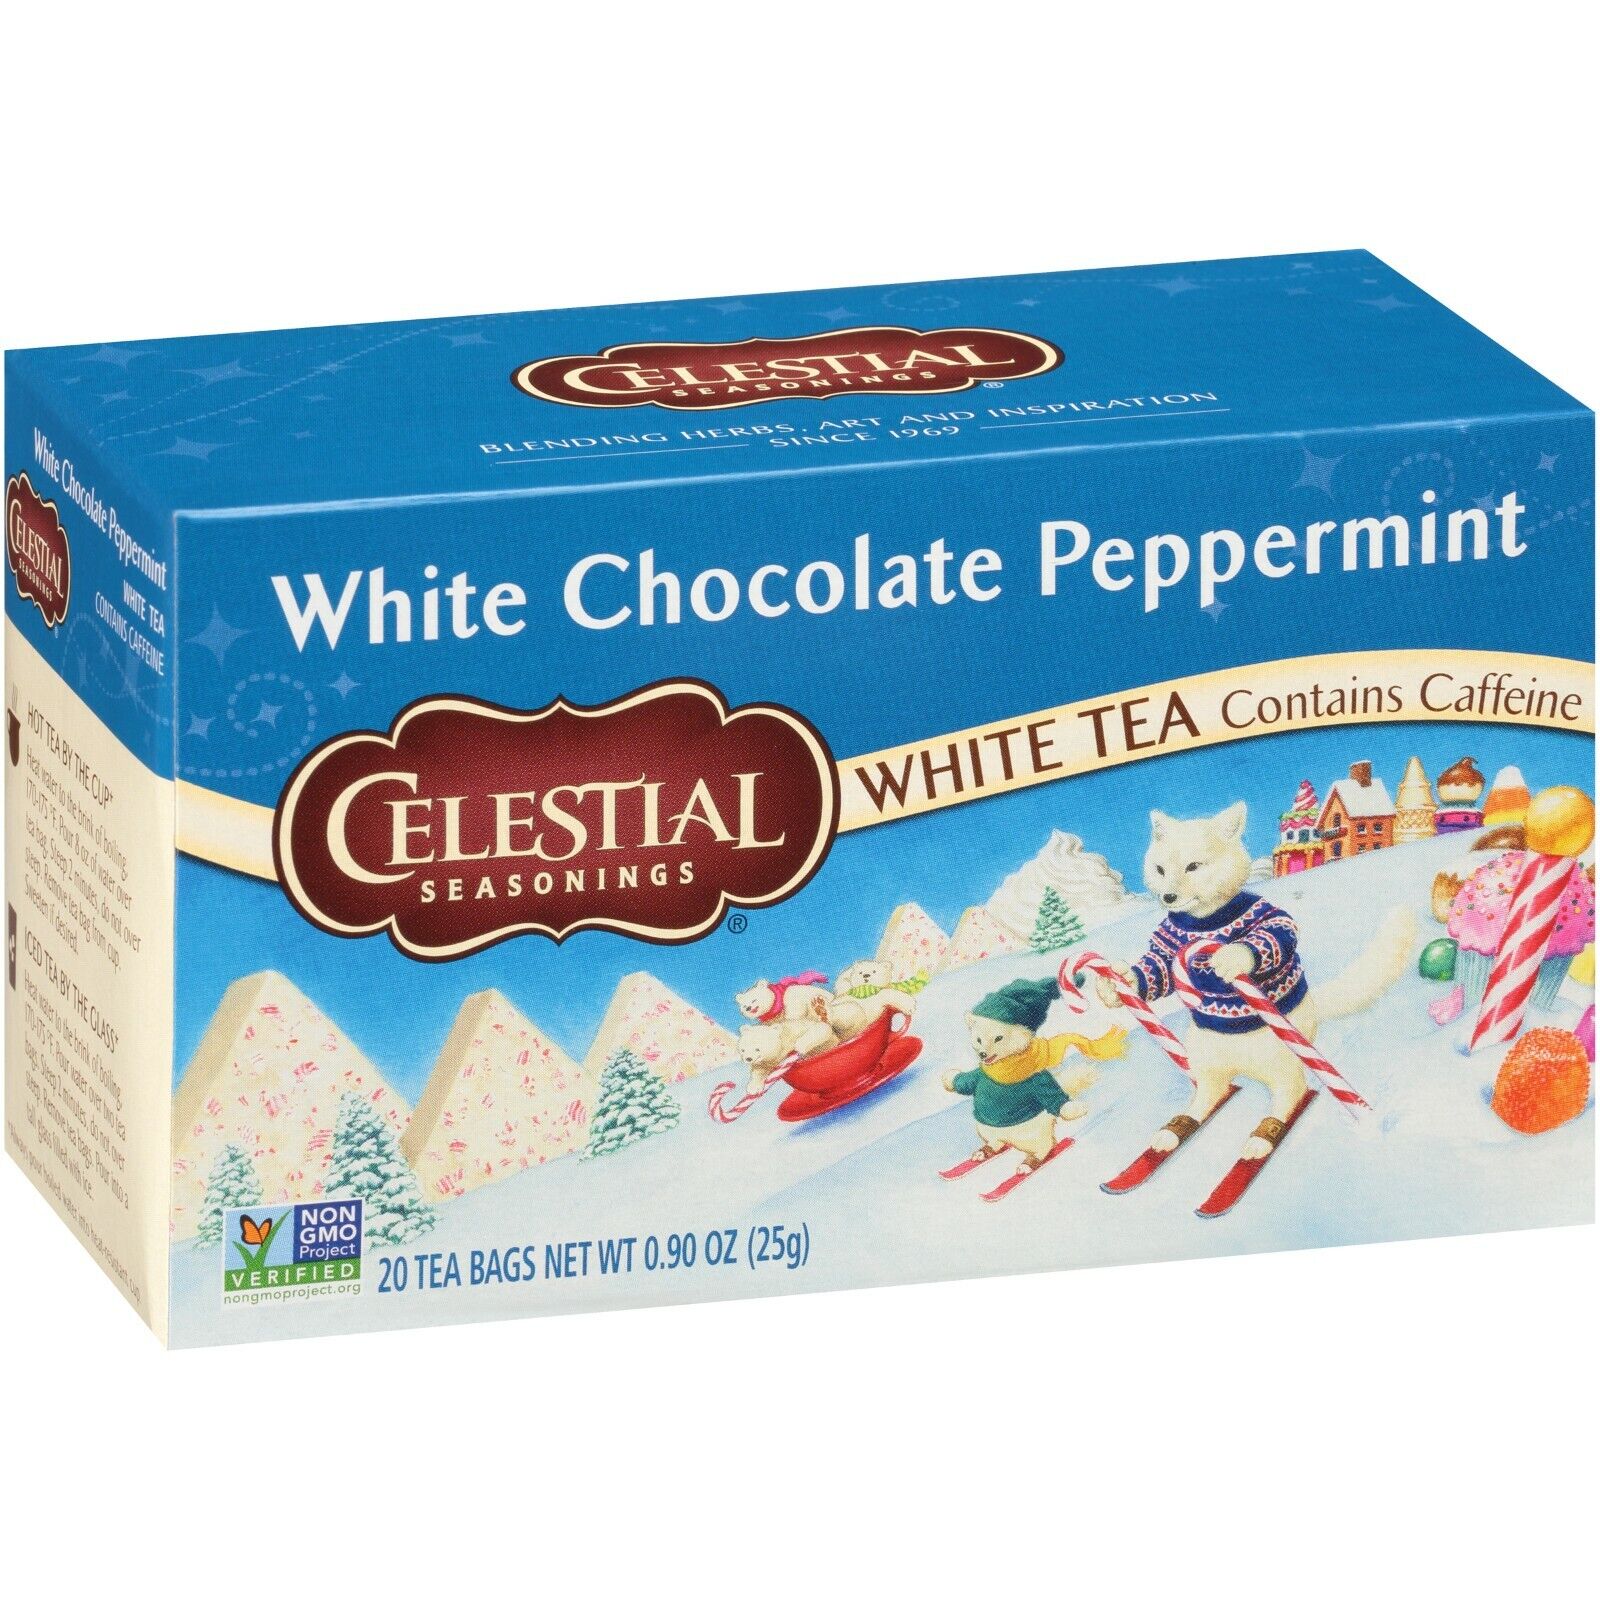 Does White Chocolate Have Caffeine